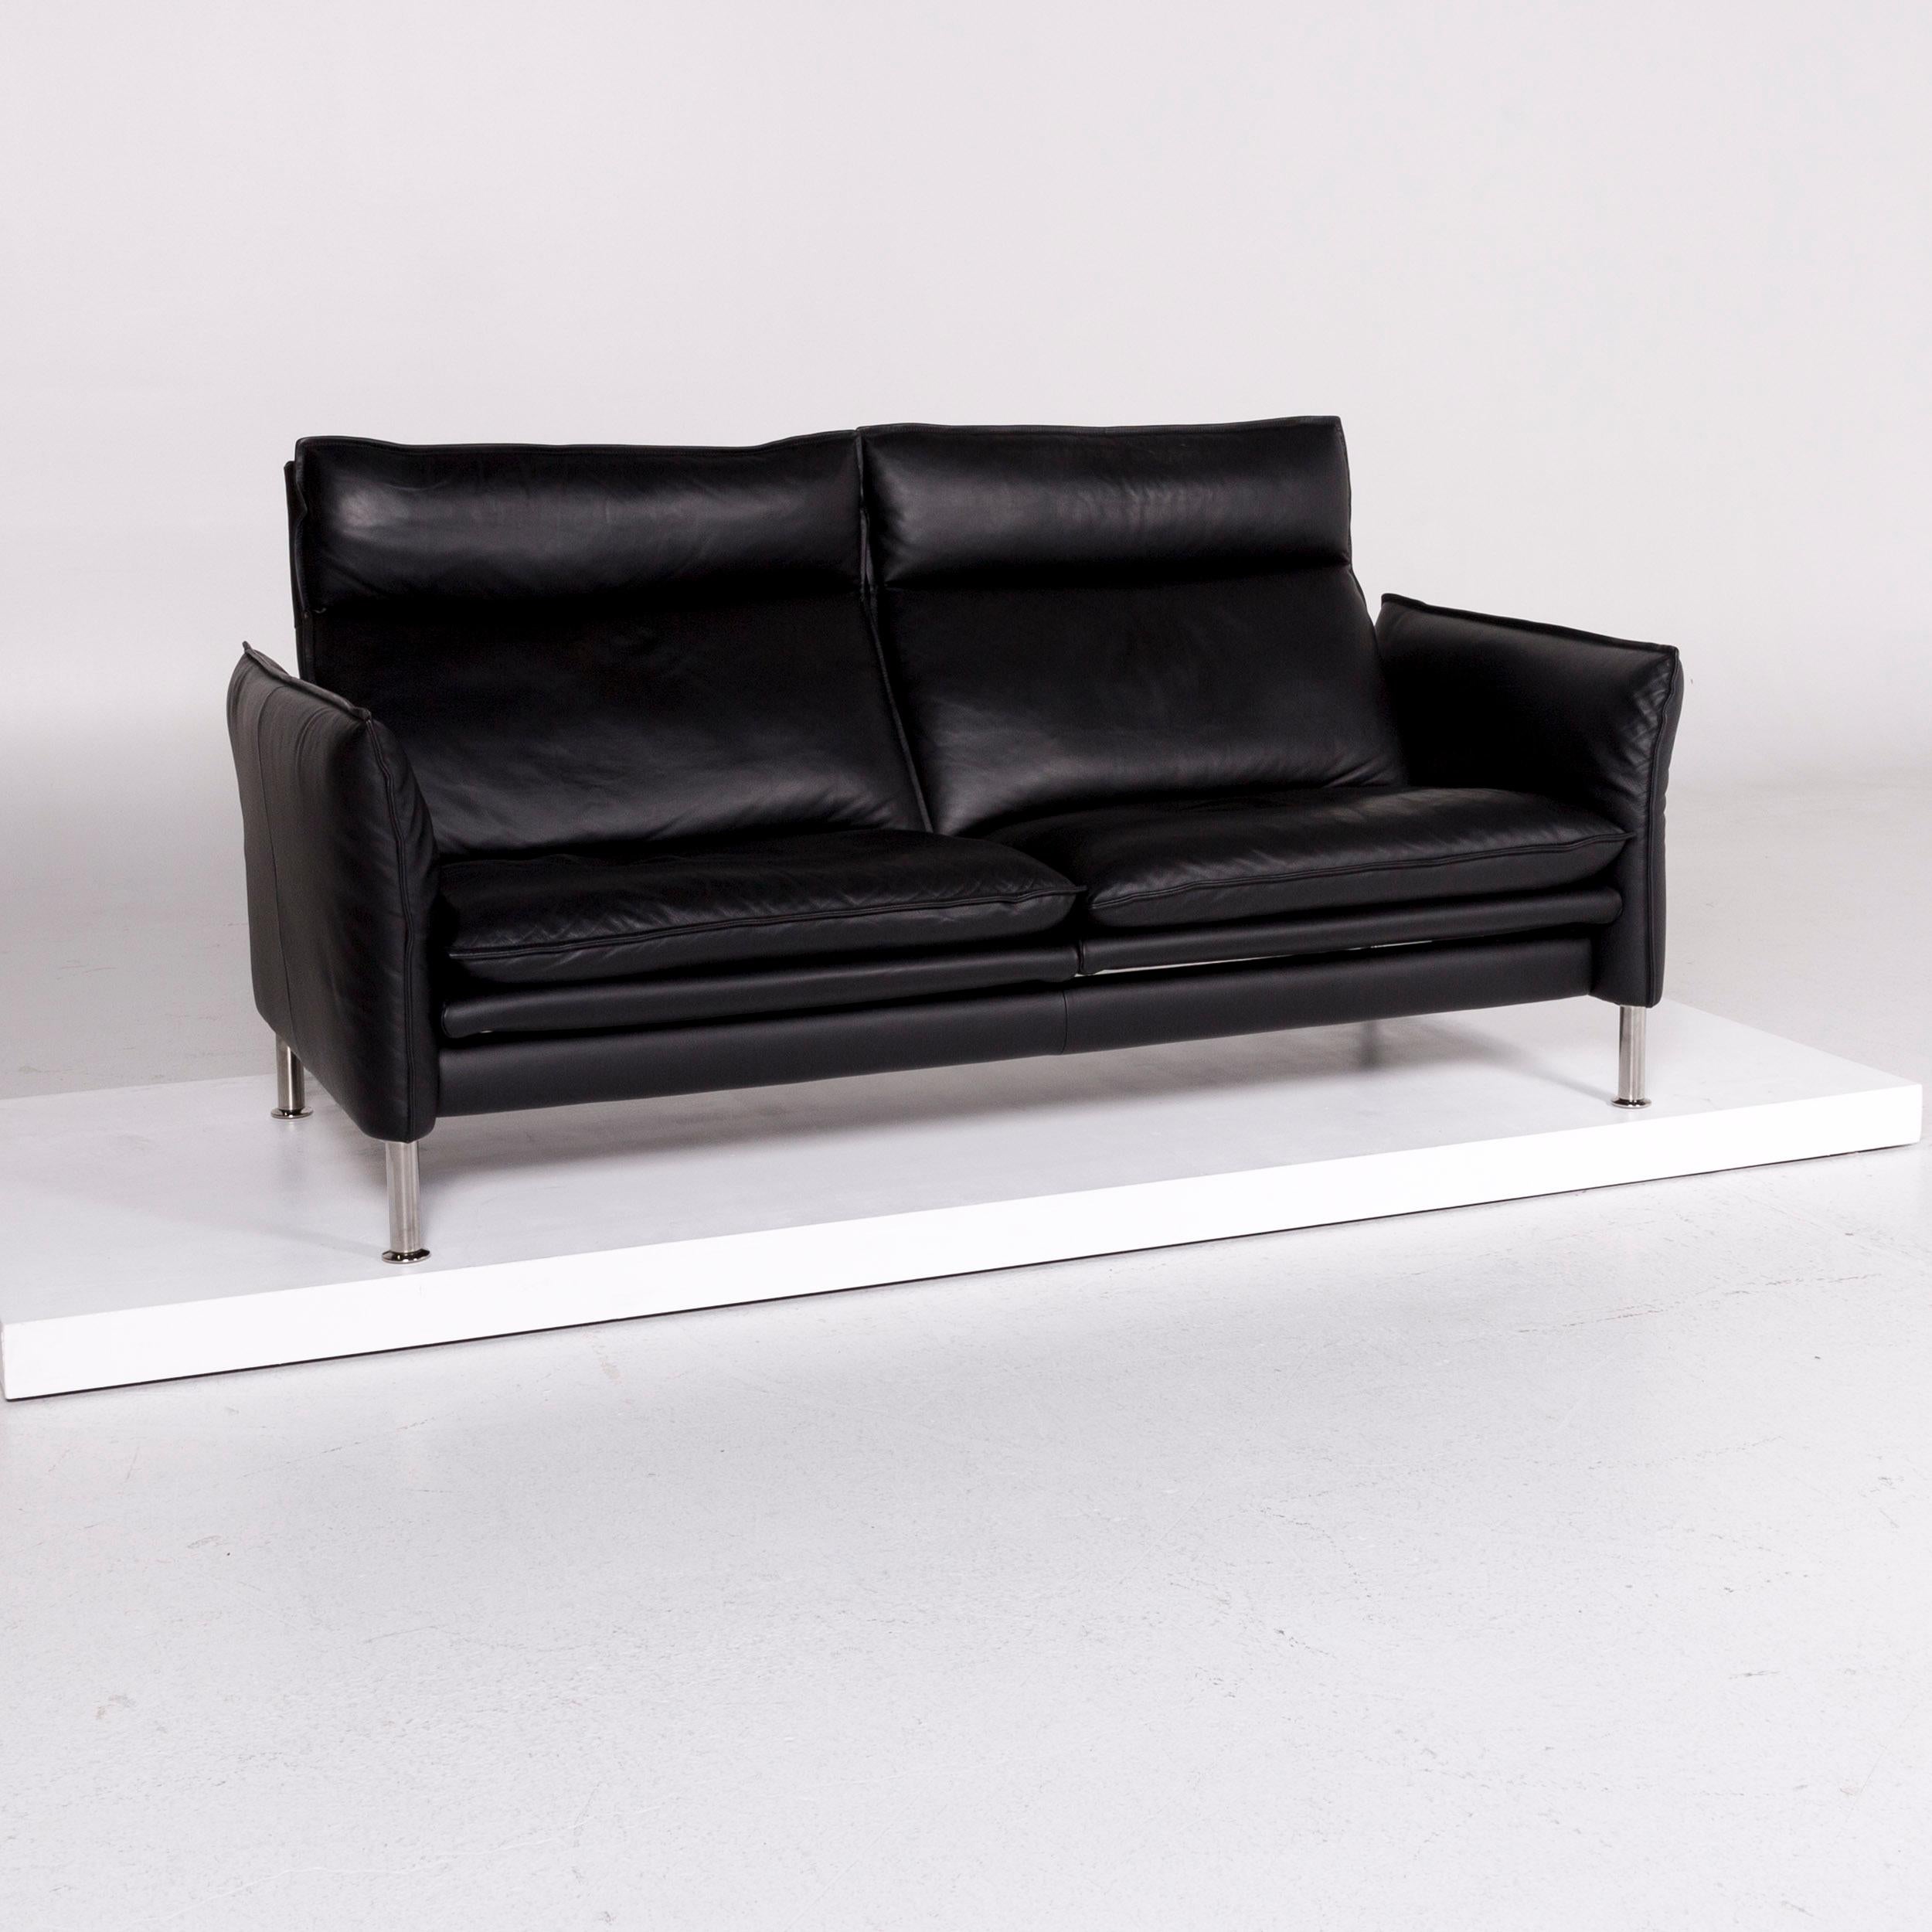 We bring to you an Erpo Porto leather sofa black two-seat relax function couch.
 

Product measurements in centimetres:
 

Depth 89
Width 178
Height 87
Seat-height 48
Rest-height 52
Seat-depth 50
Seat-width 157
Back-height 50.
 